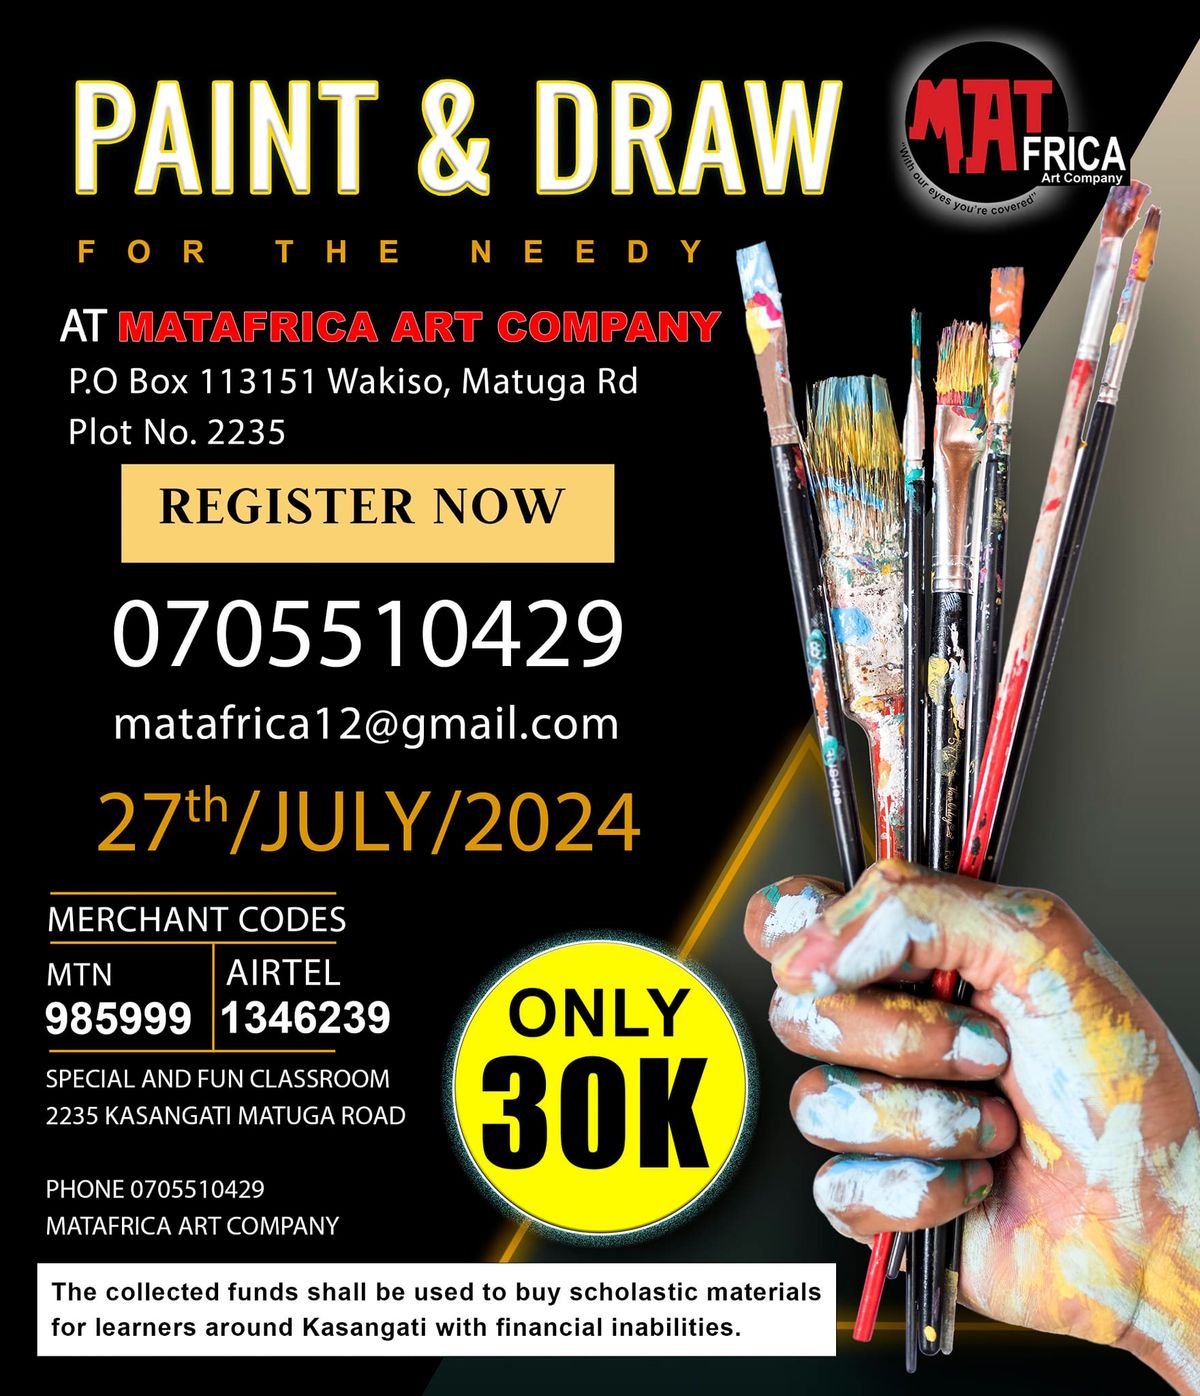 PAINT AND DRAW FOR THE NEEDY. Supporting Education for Children in Secondary Schools